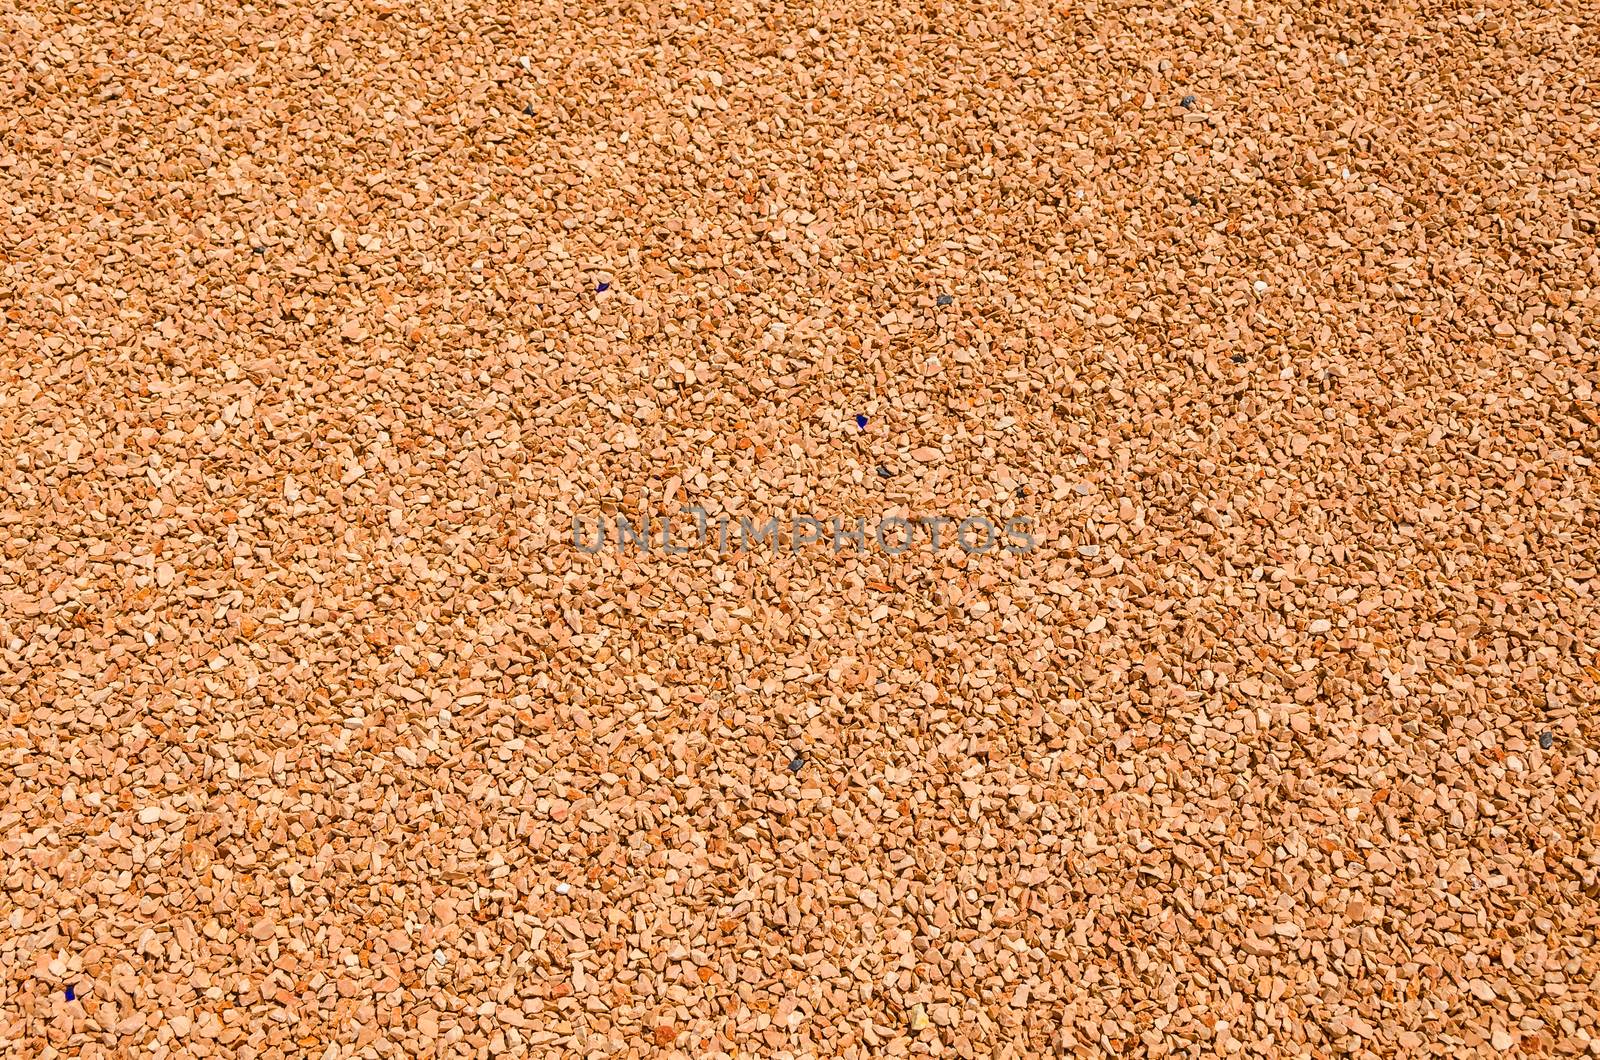 Brown small pebble as background image.